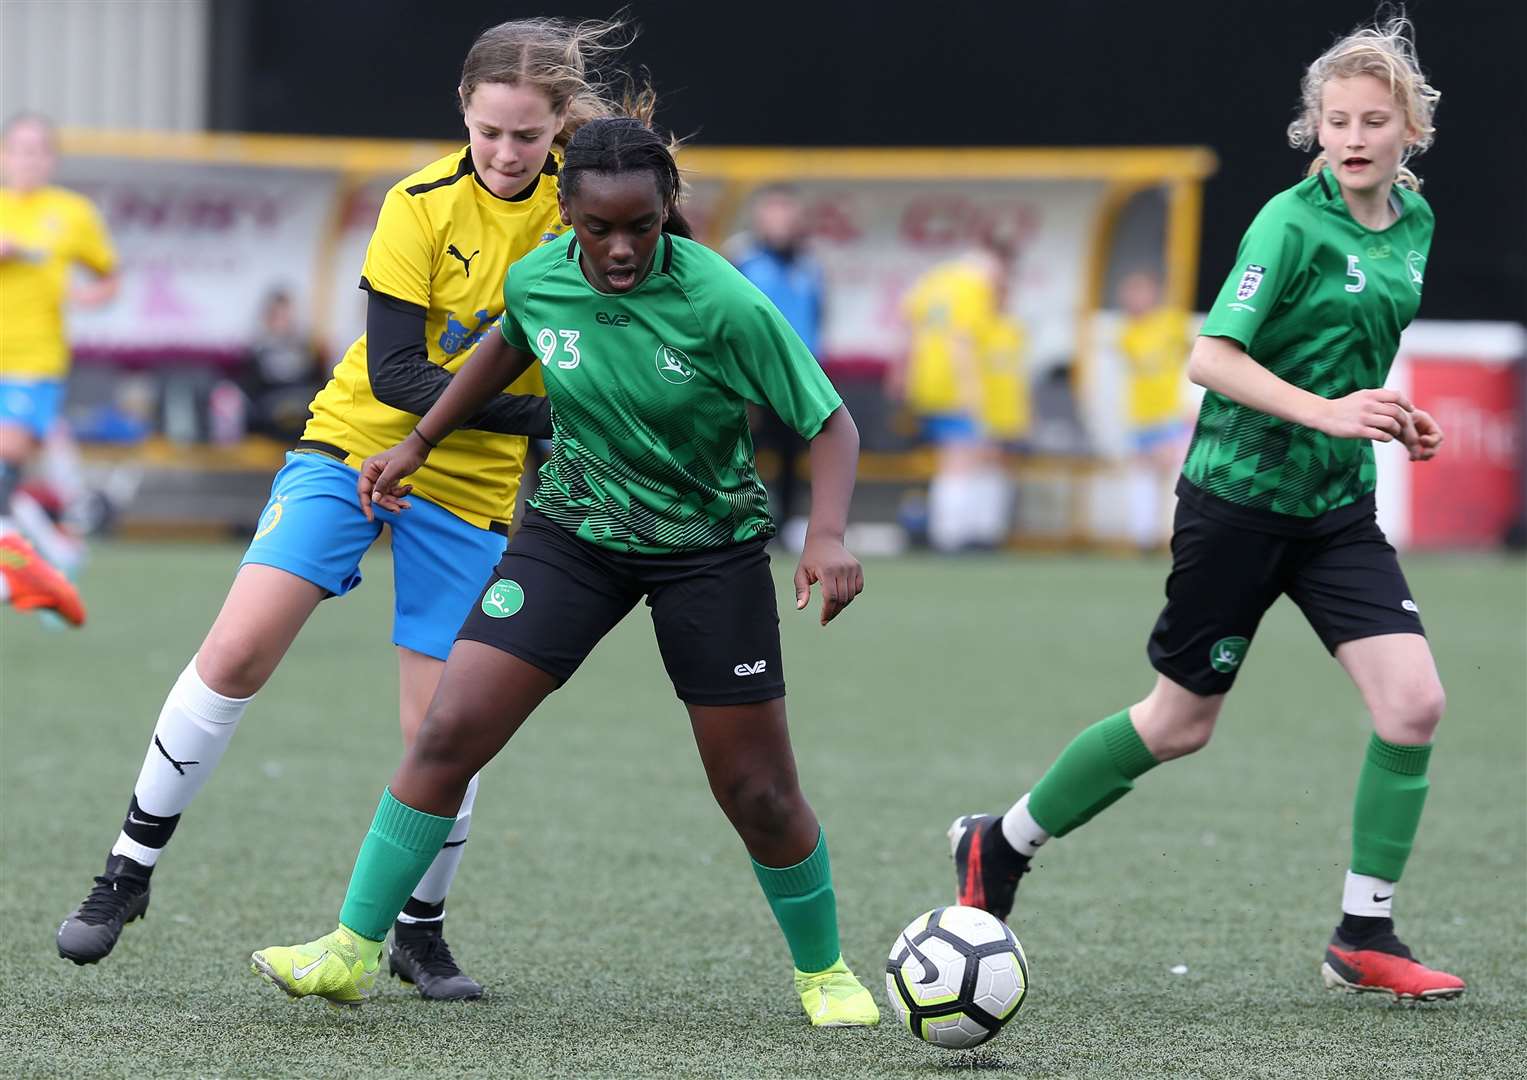 Player-of-the-match Brianna Raymond on the ball for Langton Green under-13s. Picture: PSP Images